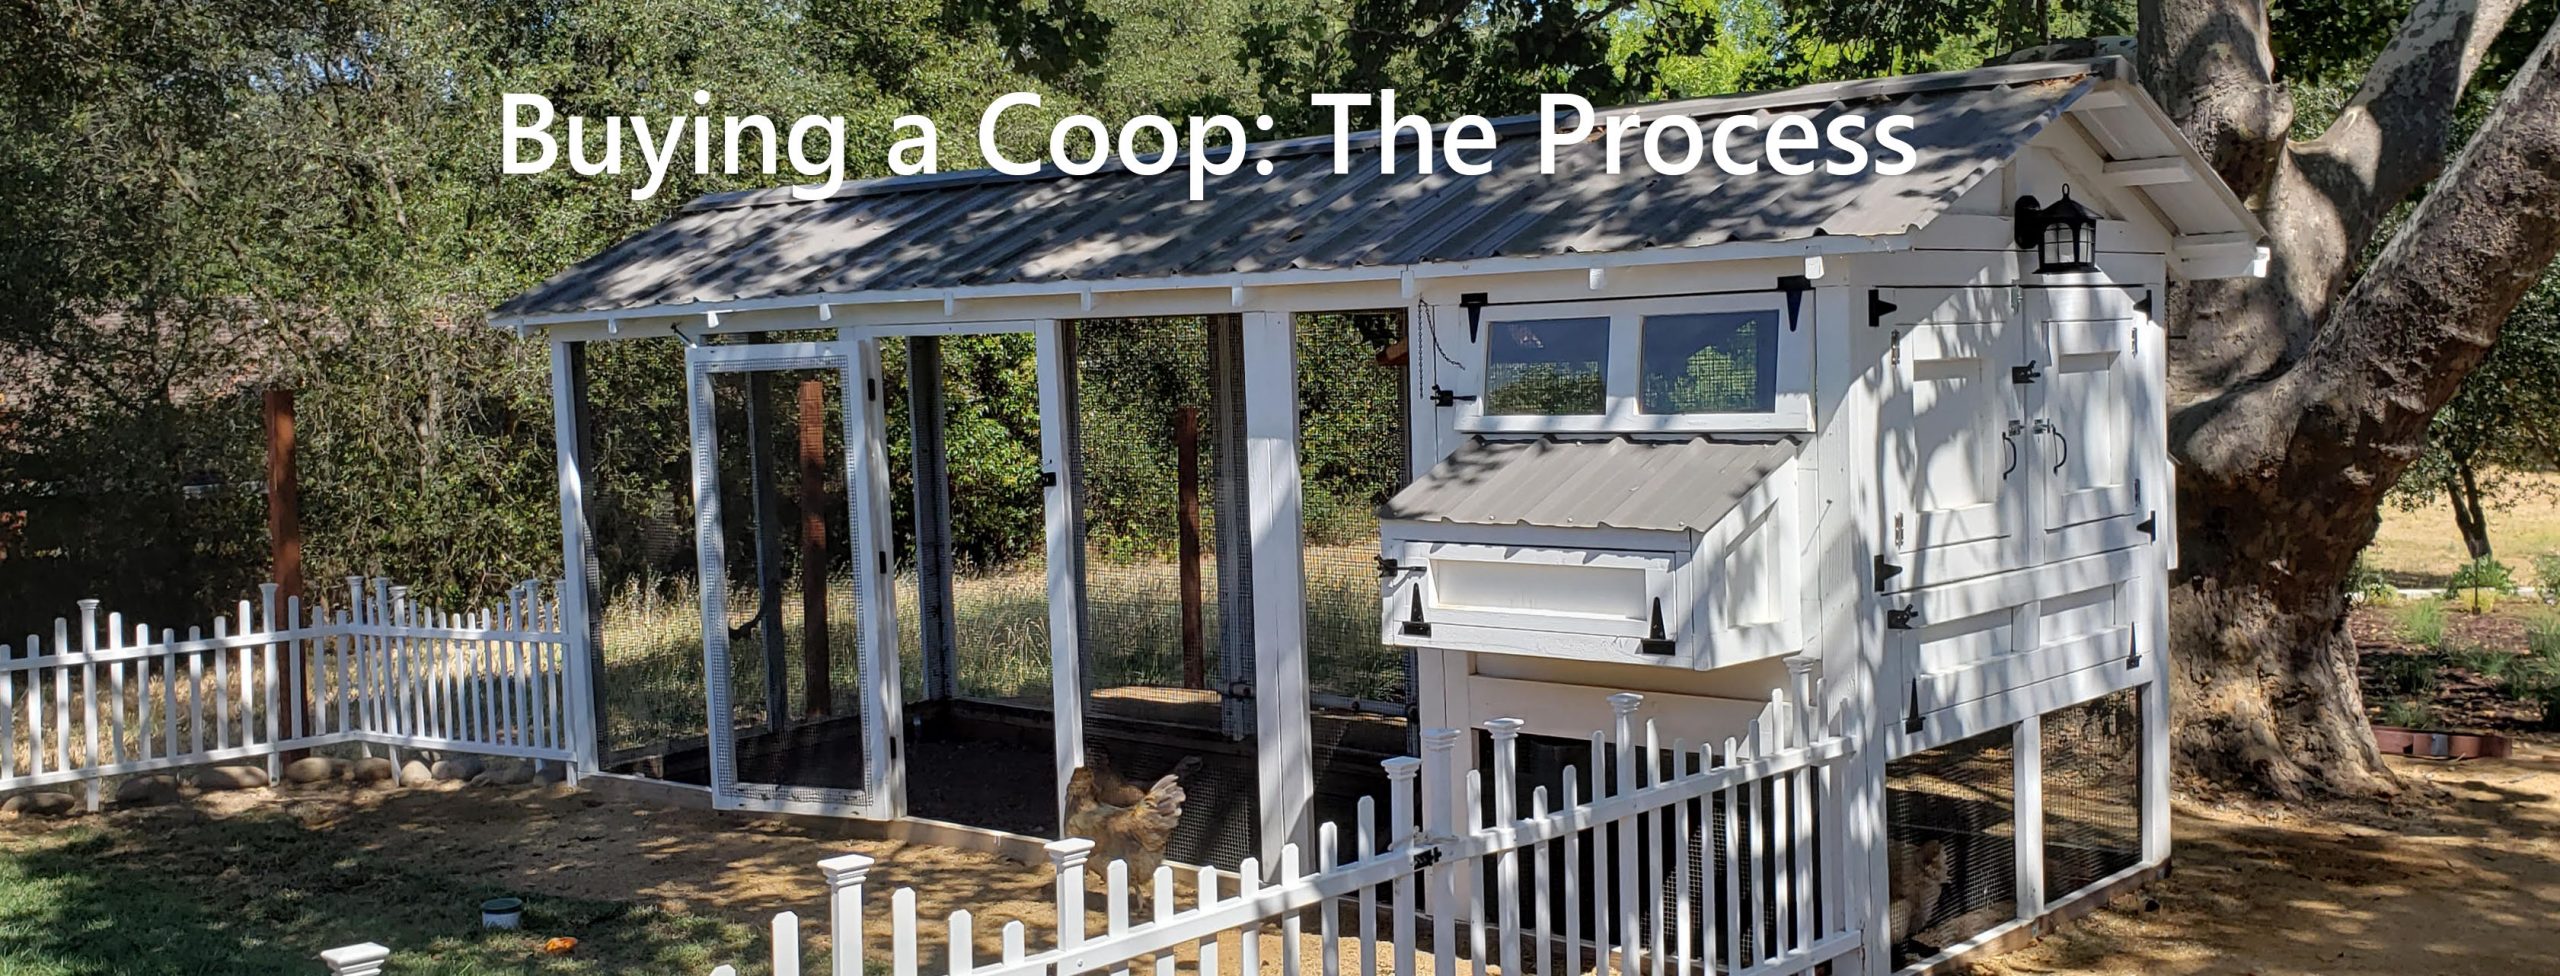 Buying a chicken coop: the process